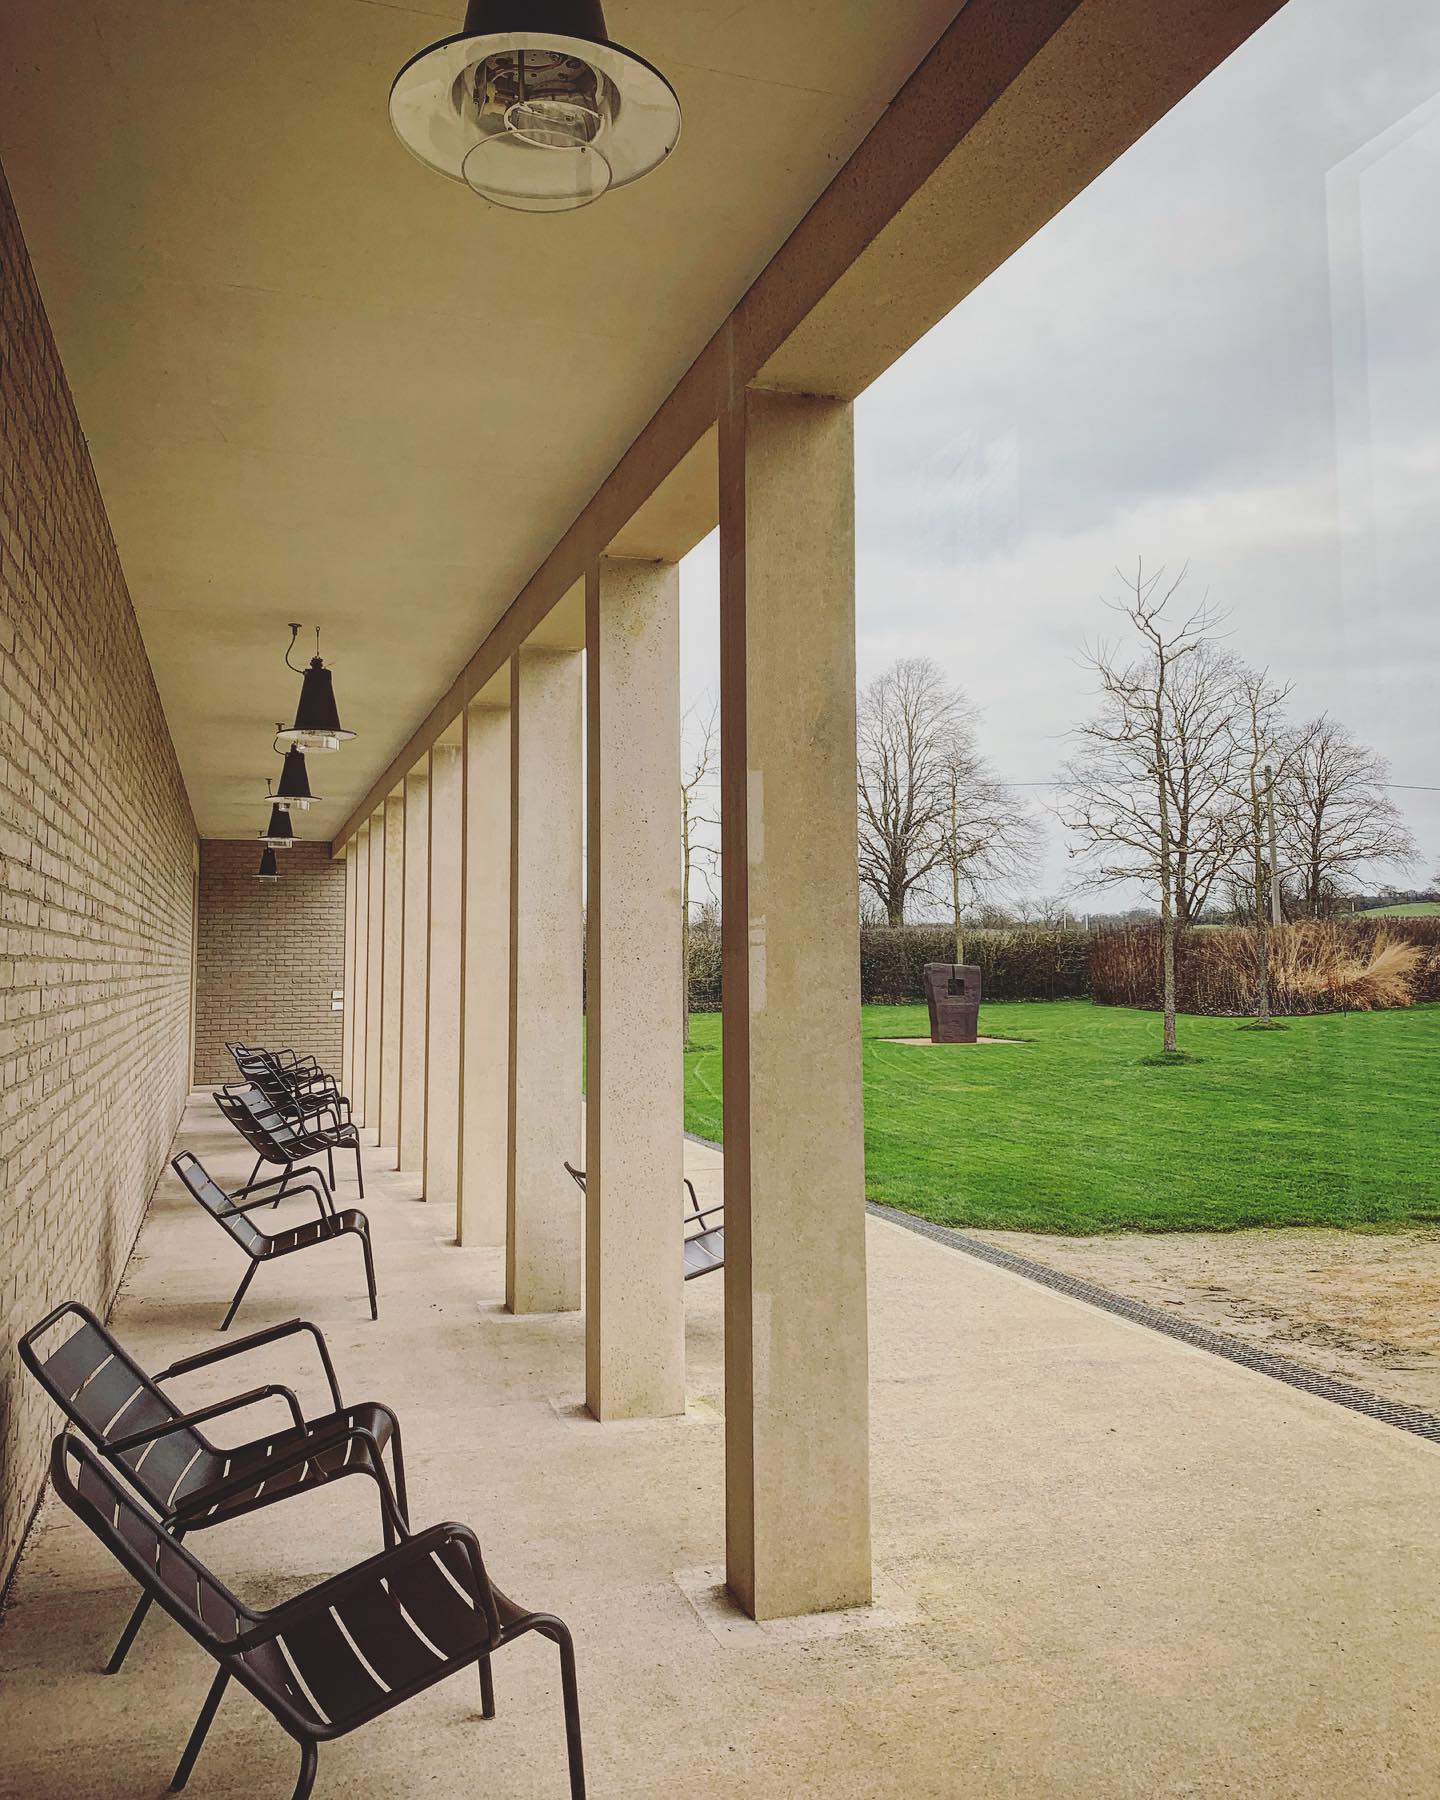 Lovely birthday trip to Bruton today ️ the lovely tranquil @hauserwirth was the perfect place to spend the afternoon!